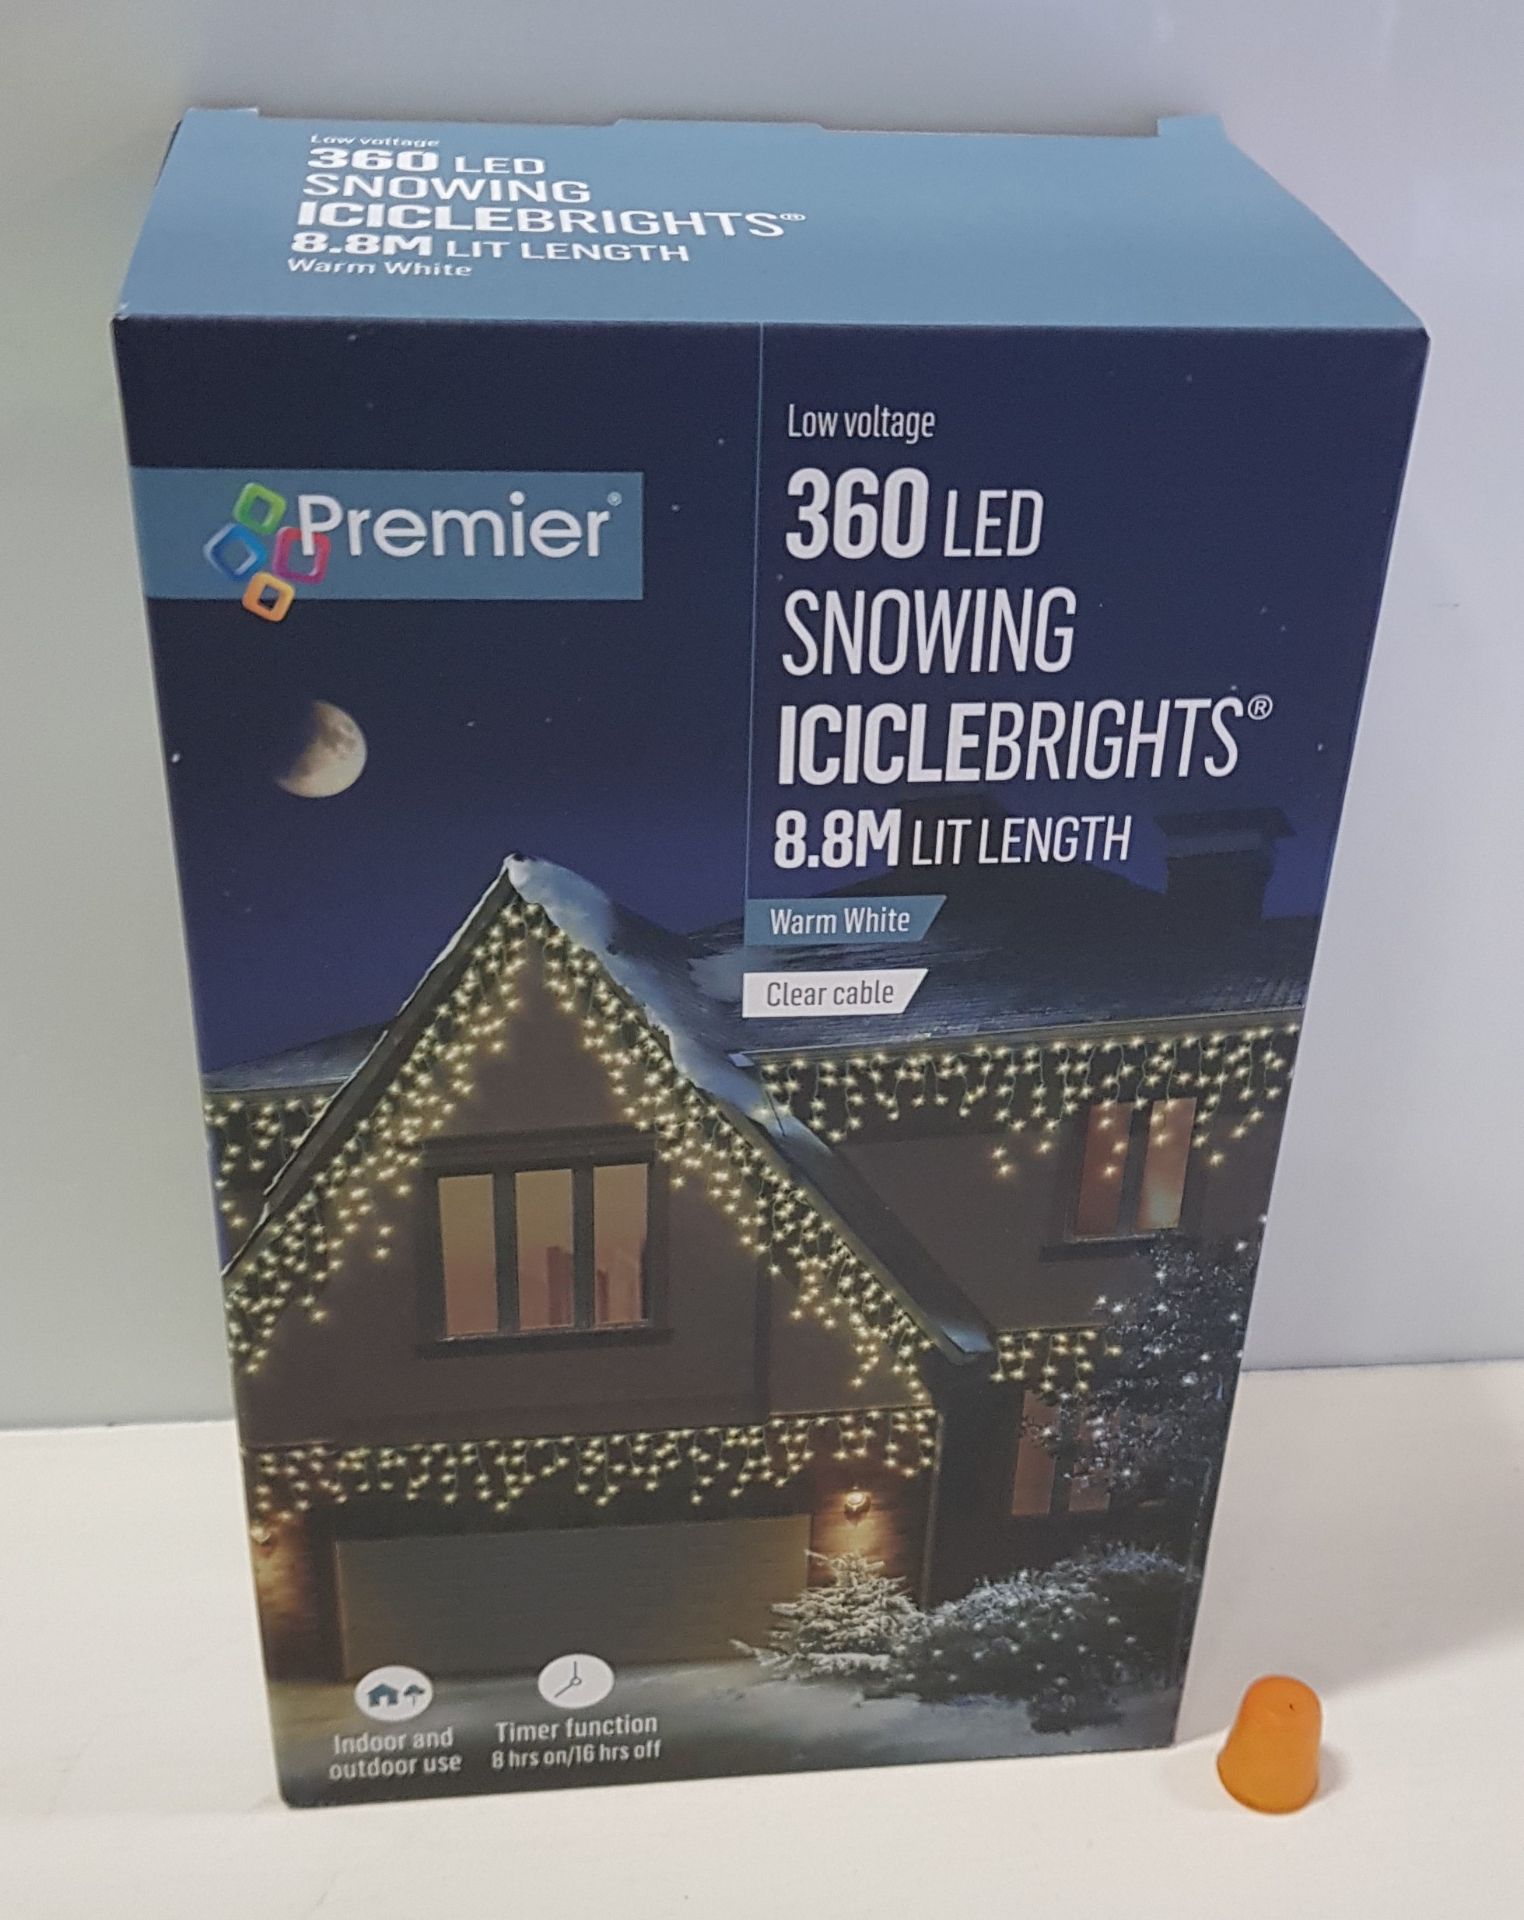 5 X BRAND NEW PREMIER LOW VOLTAGE 360 LED SNOWING ICICLEBRIGHTS - 8.8 M LIT LENGTH IN WHITE -